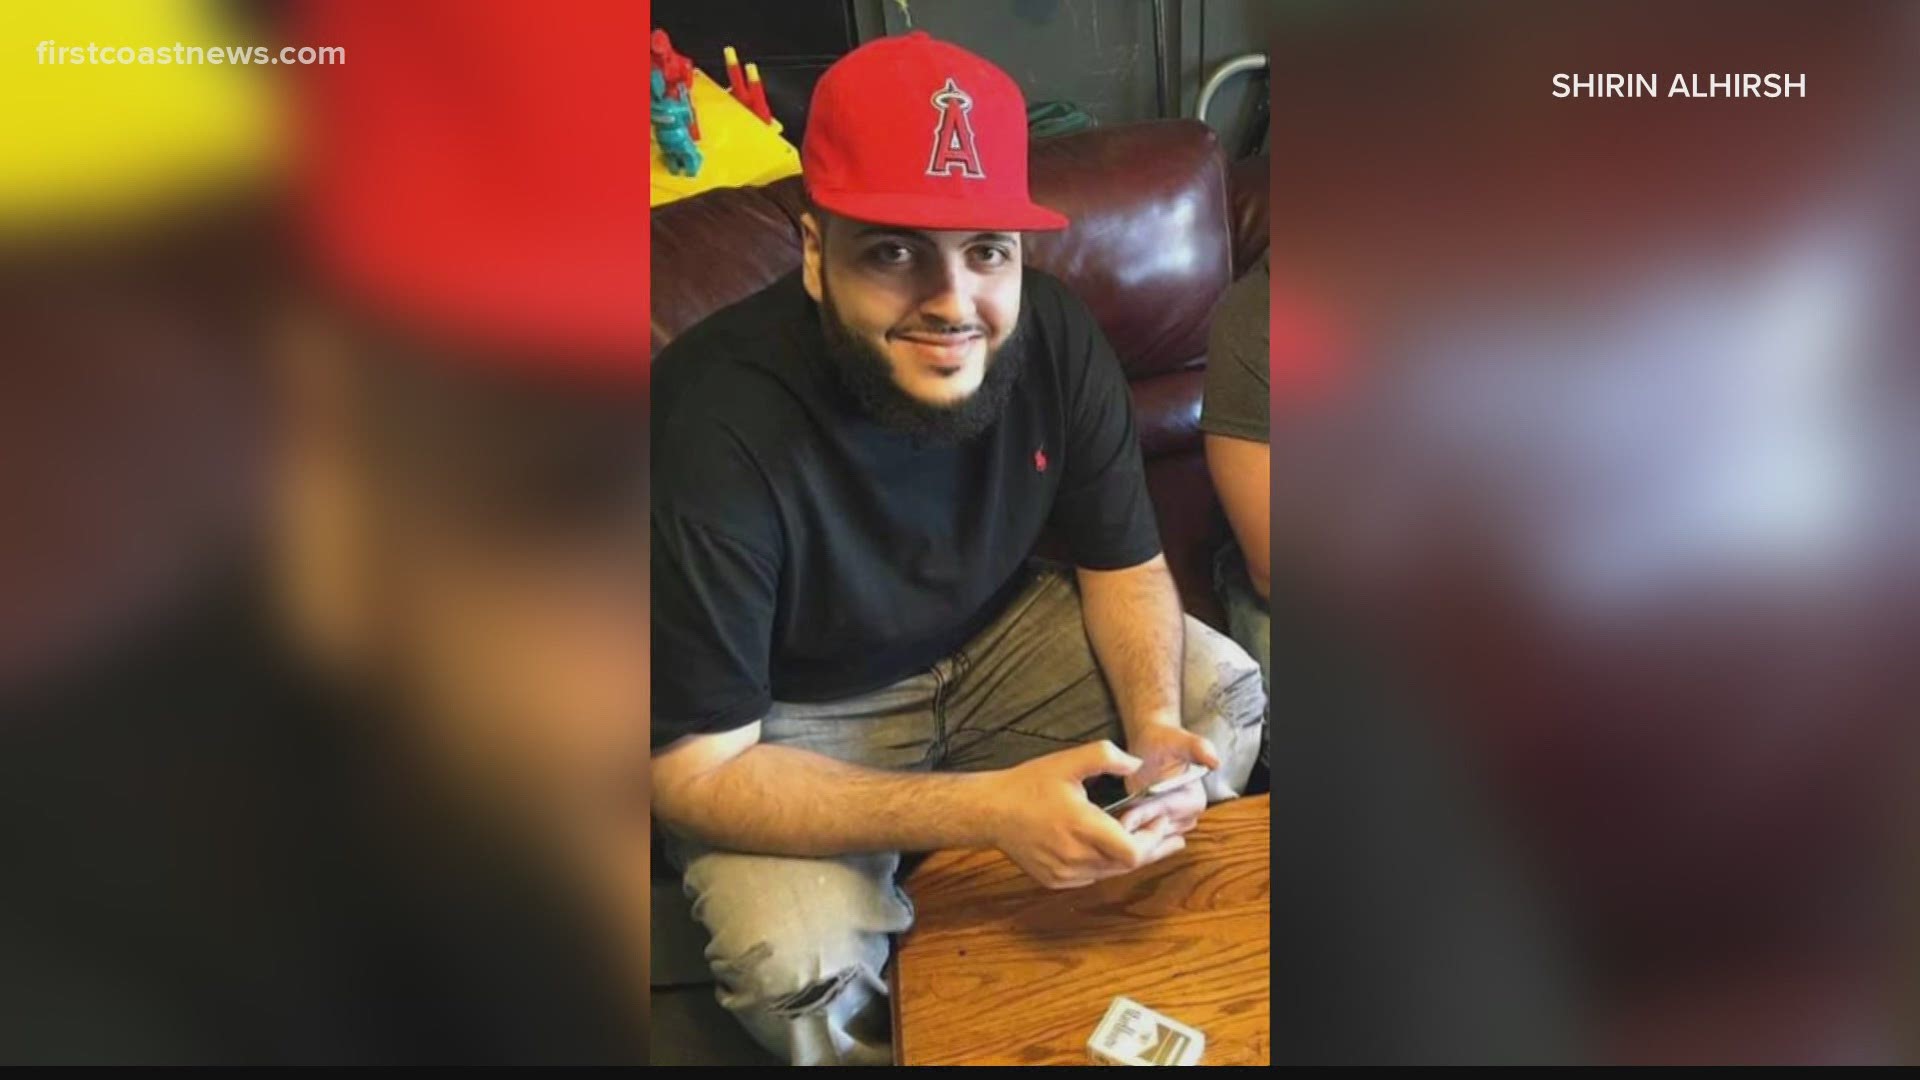 Eight months after Elias Alhirsh was shot and killed, his family and the Jacksonville Sheriff's Office are asking the community for answers.